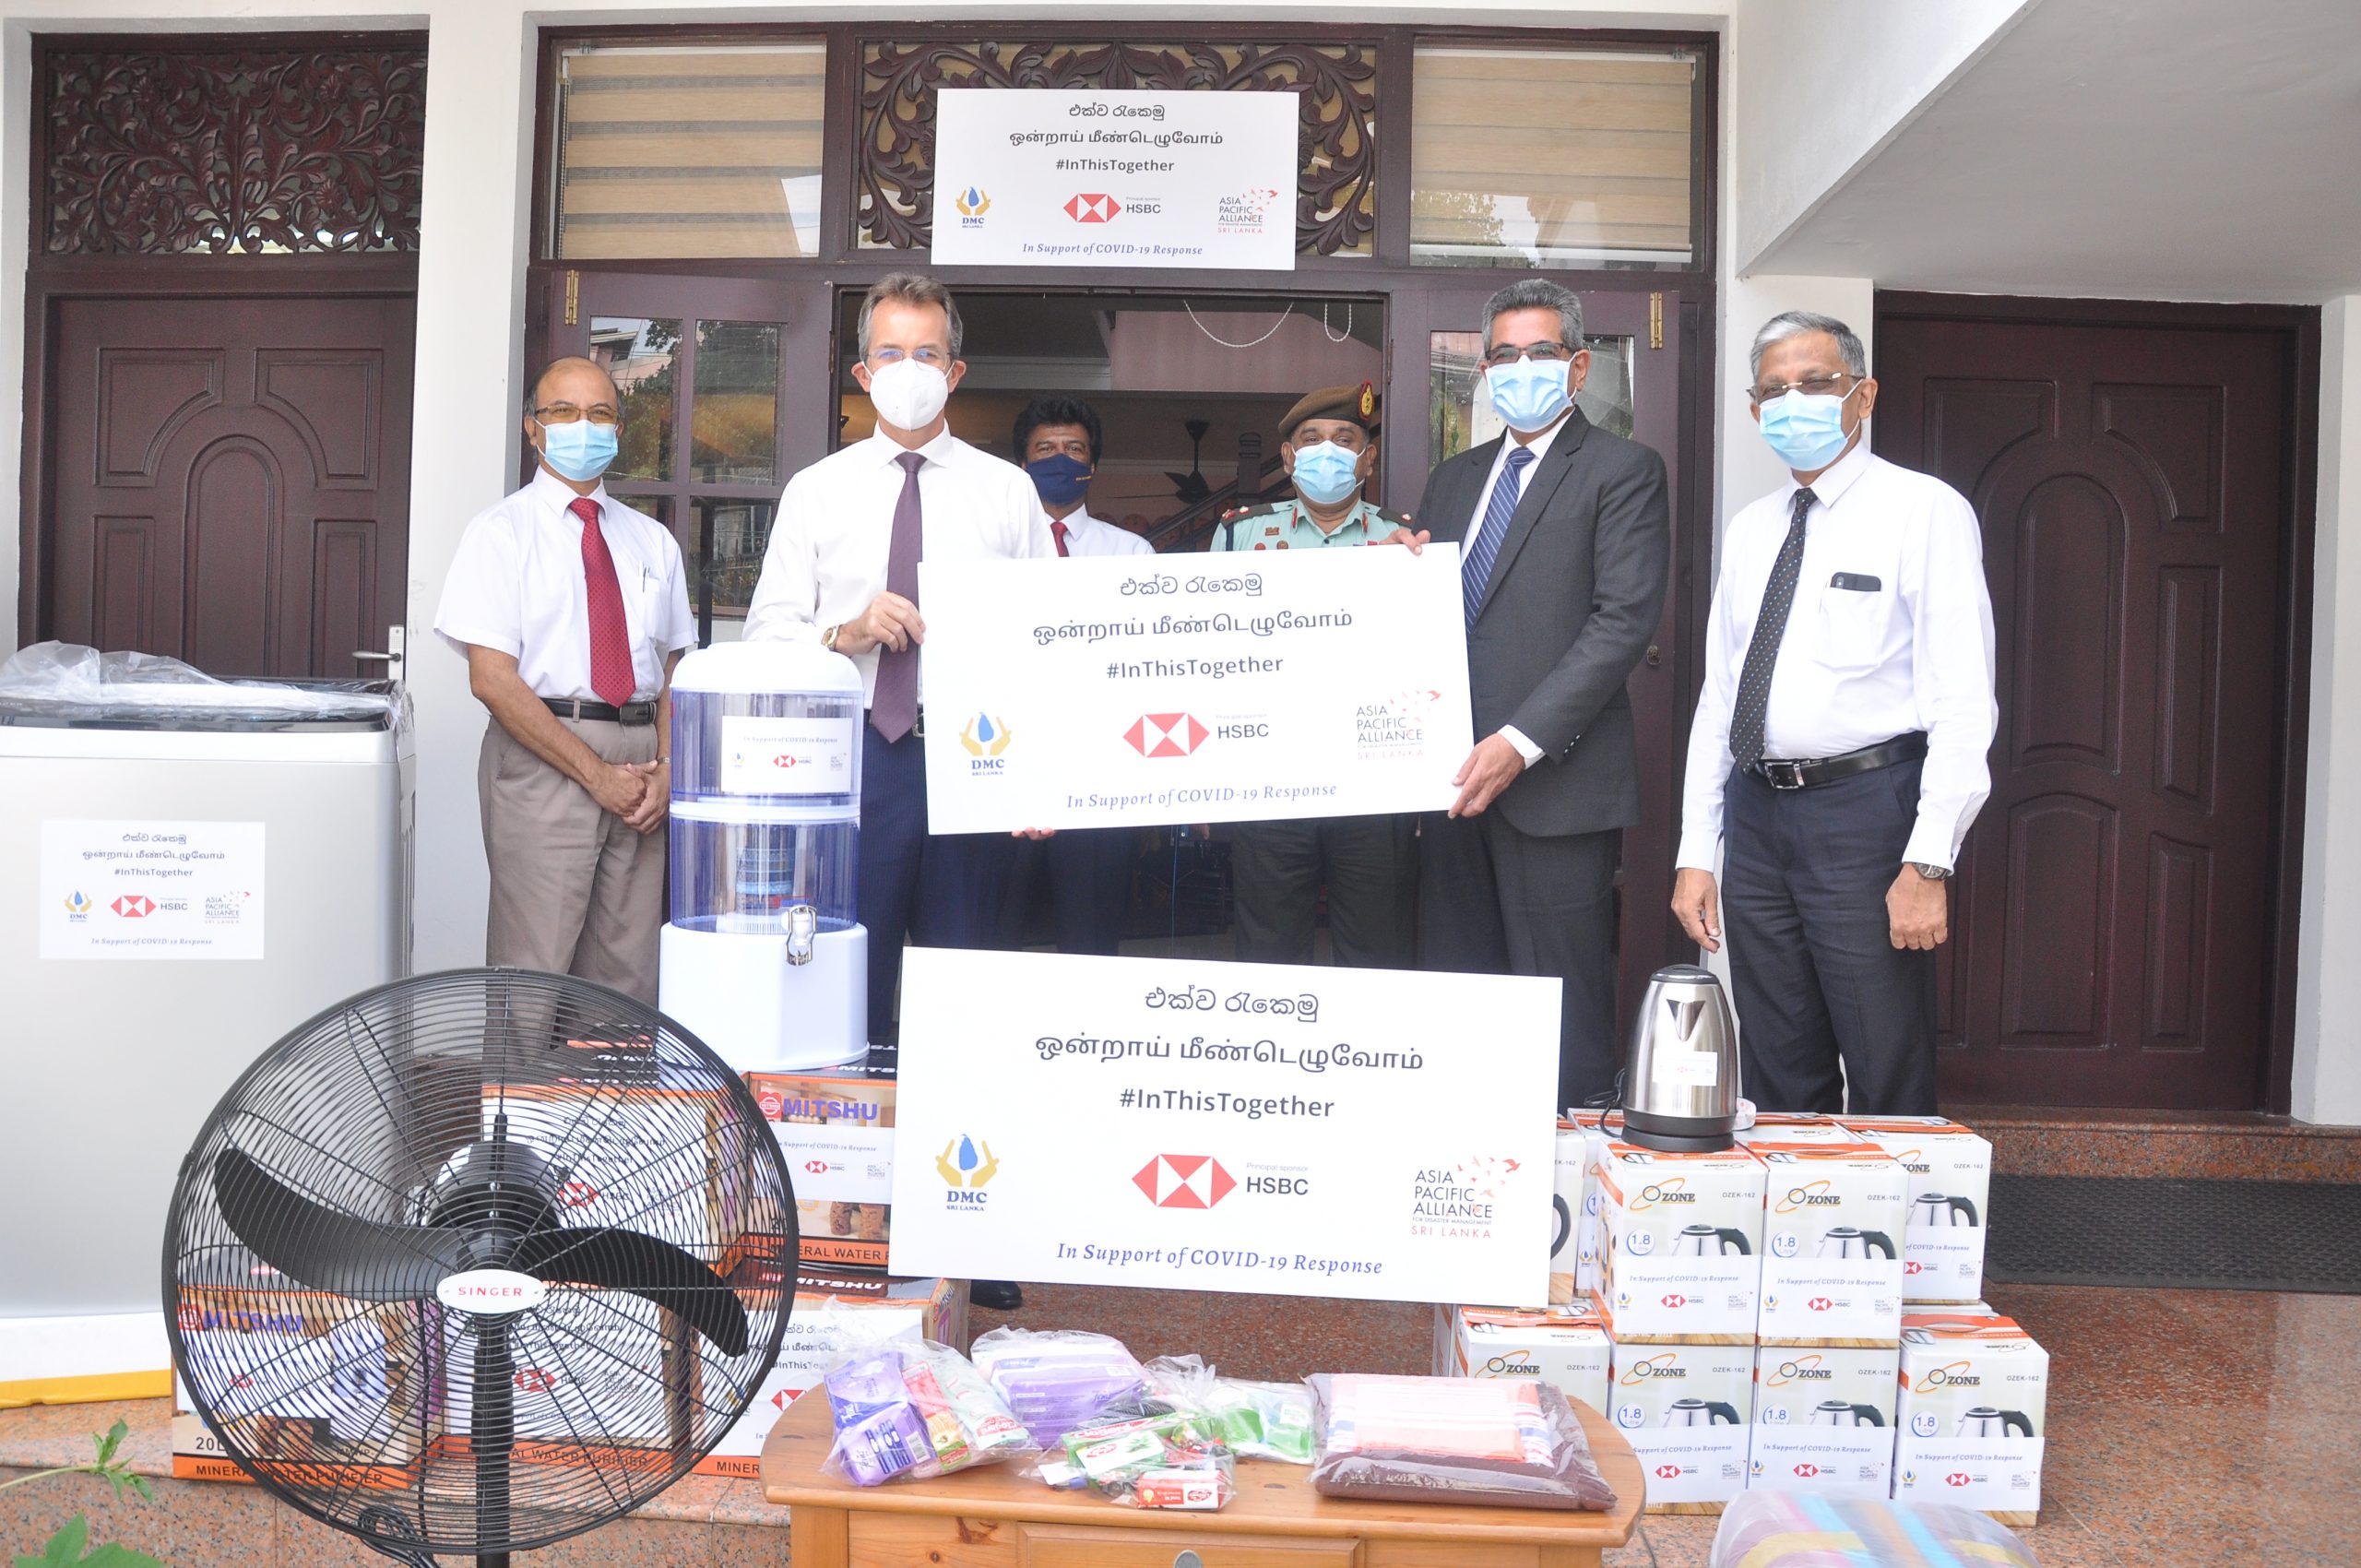 HSBC Sri Lanka Joins Hands with A-PAD SL in Responding to COVID-19 Second Wave